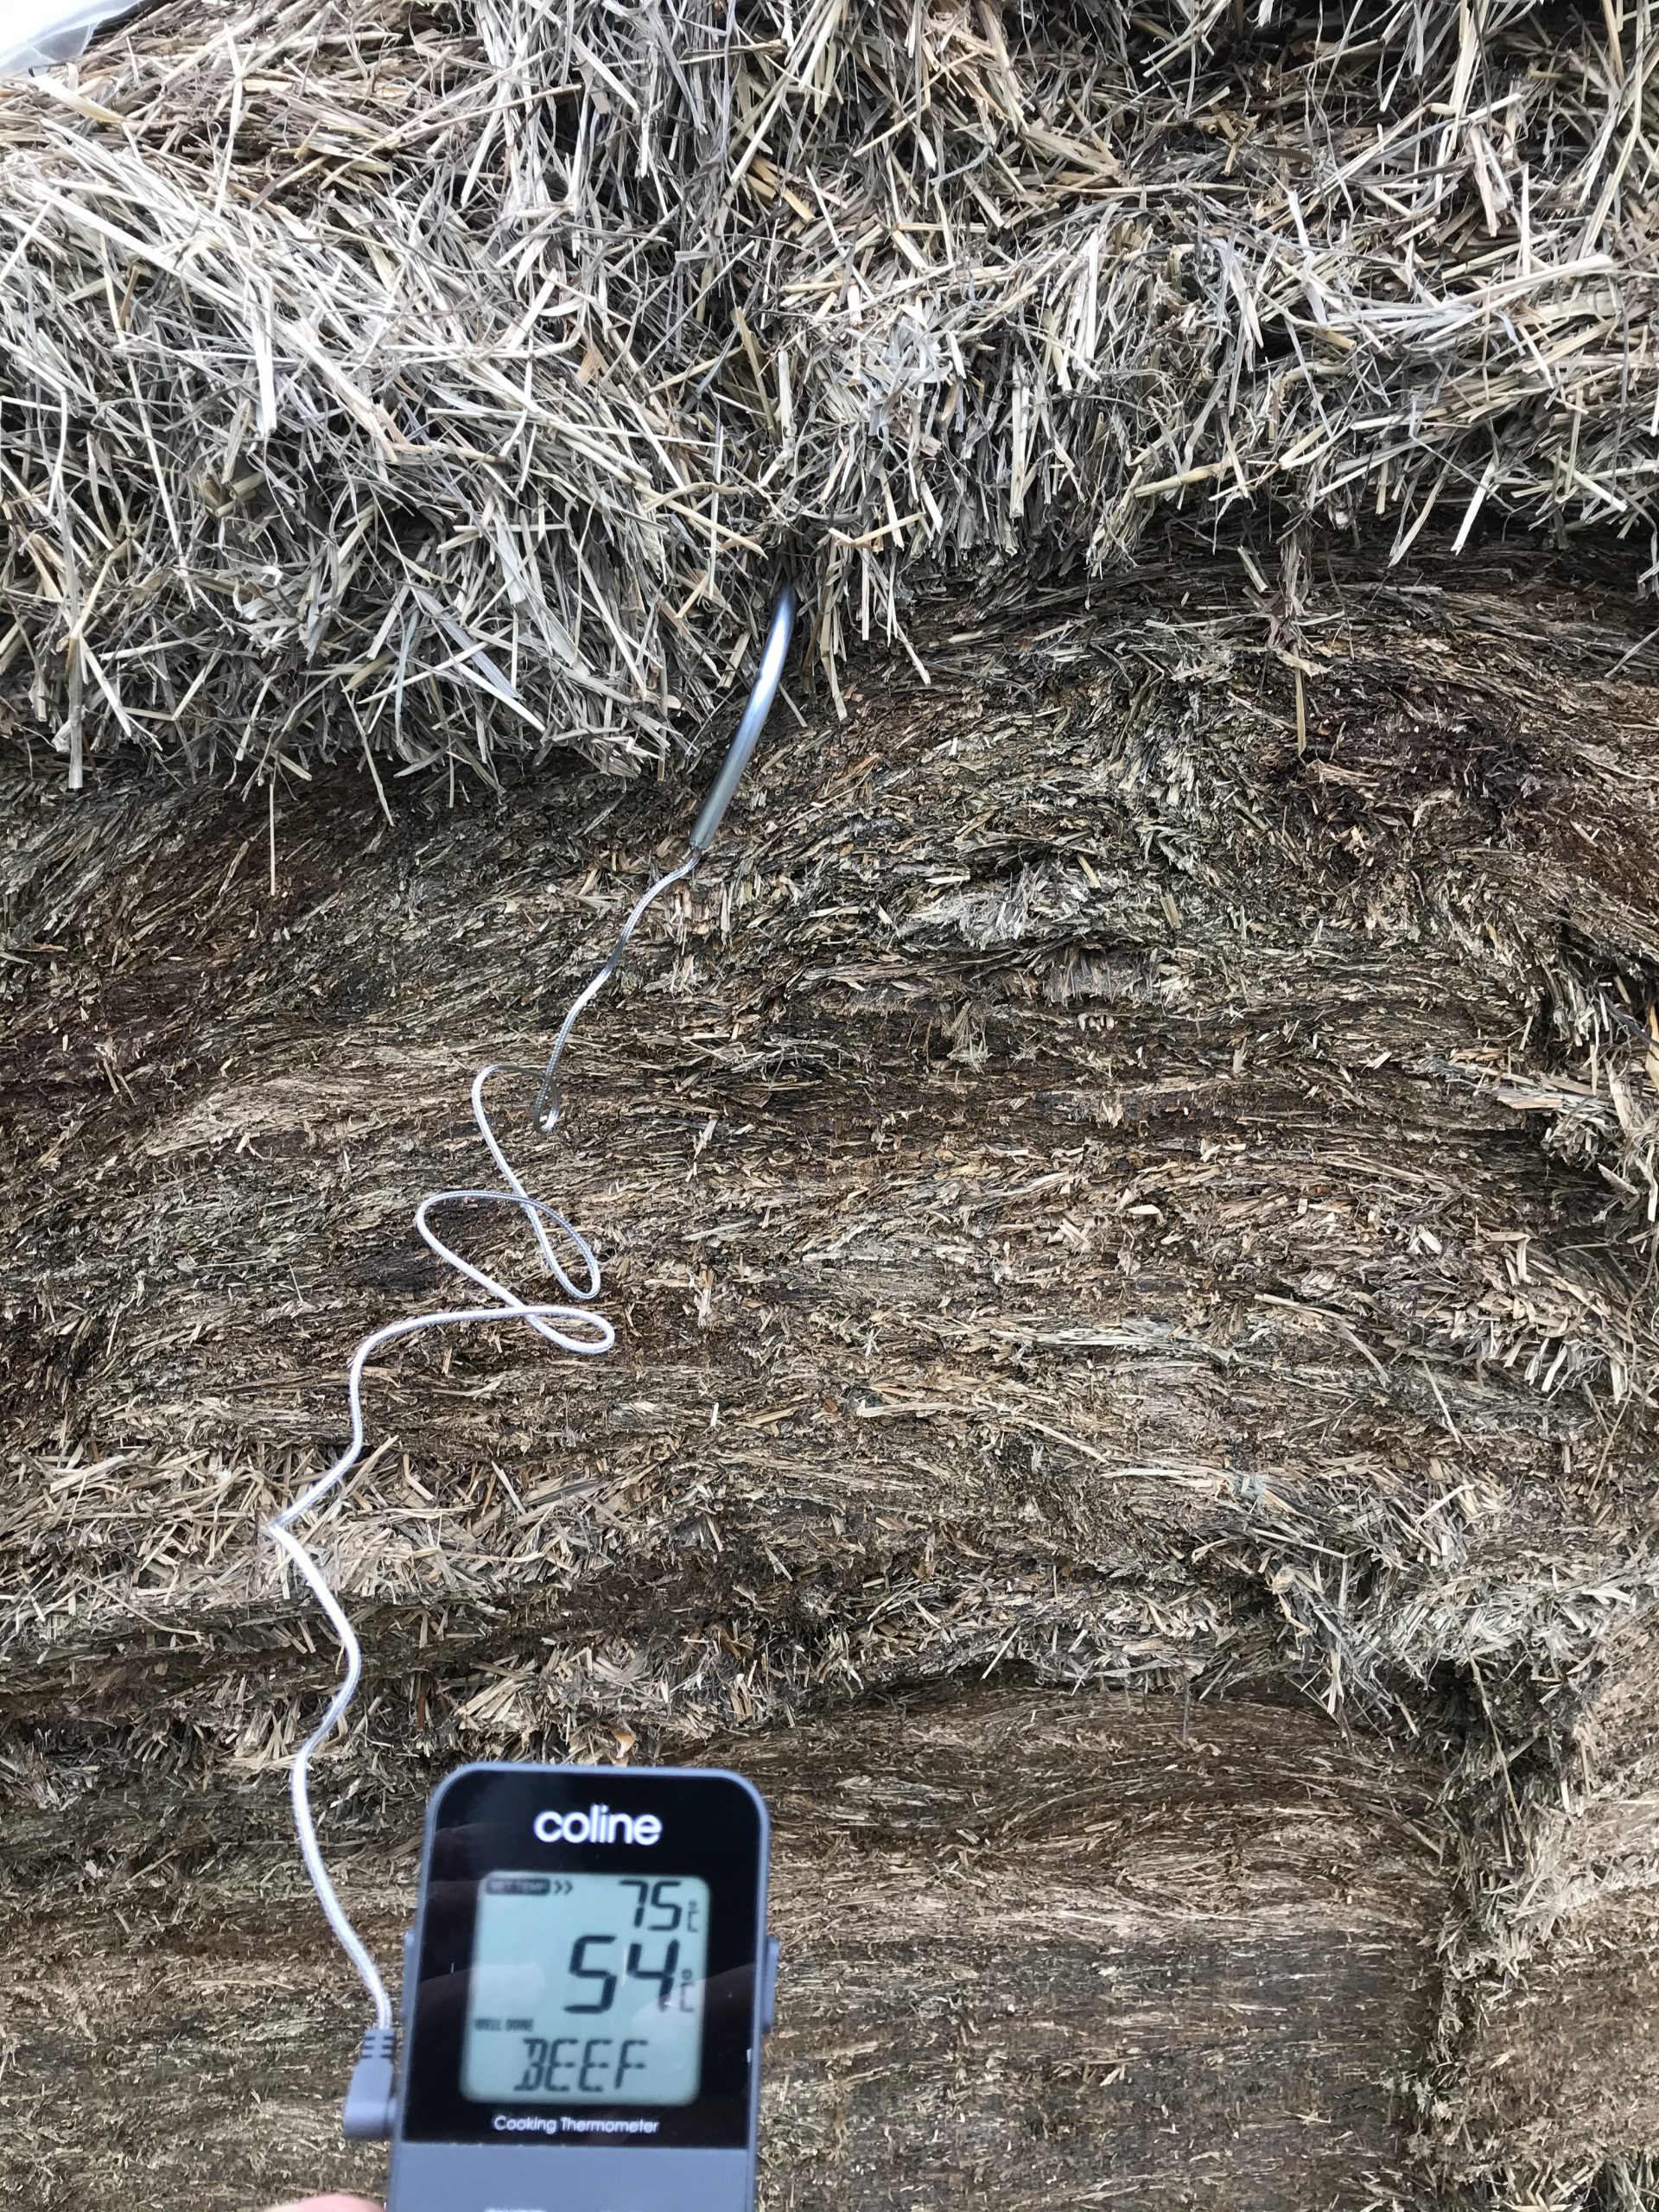 Heated-silage-scaled